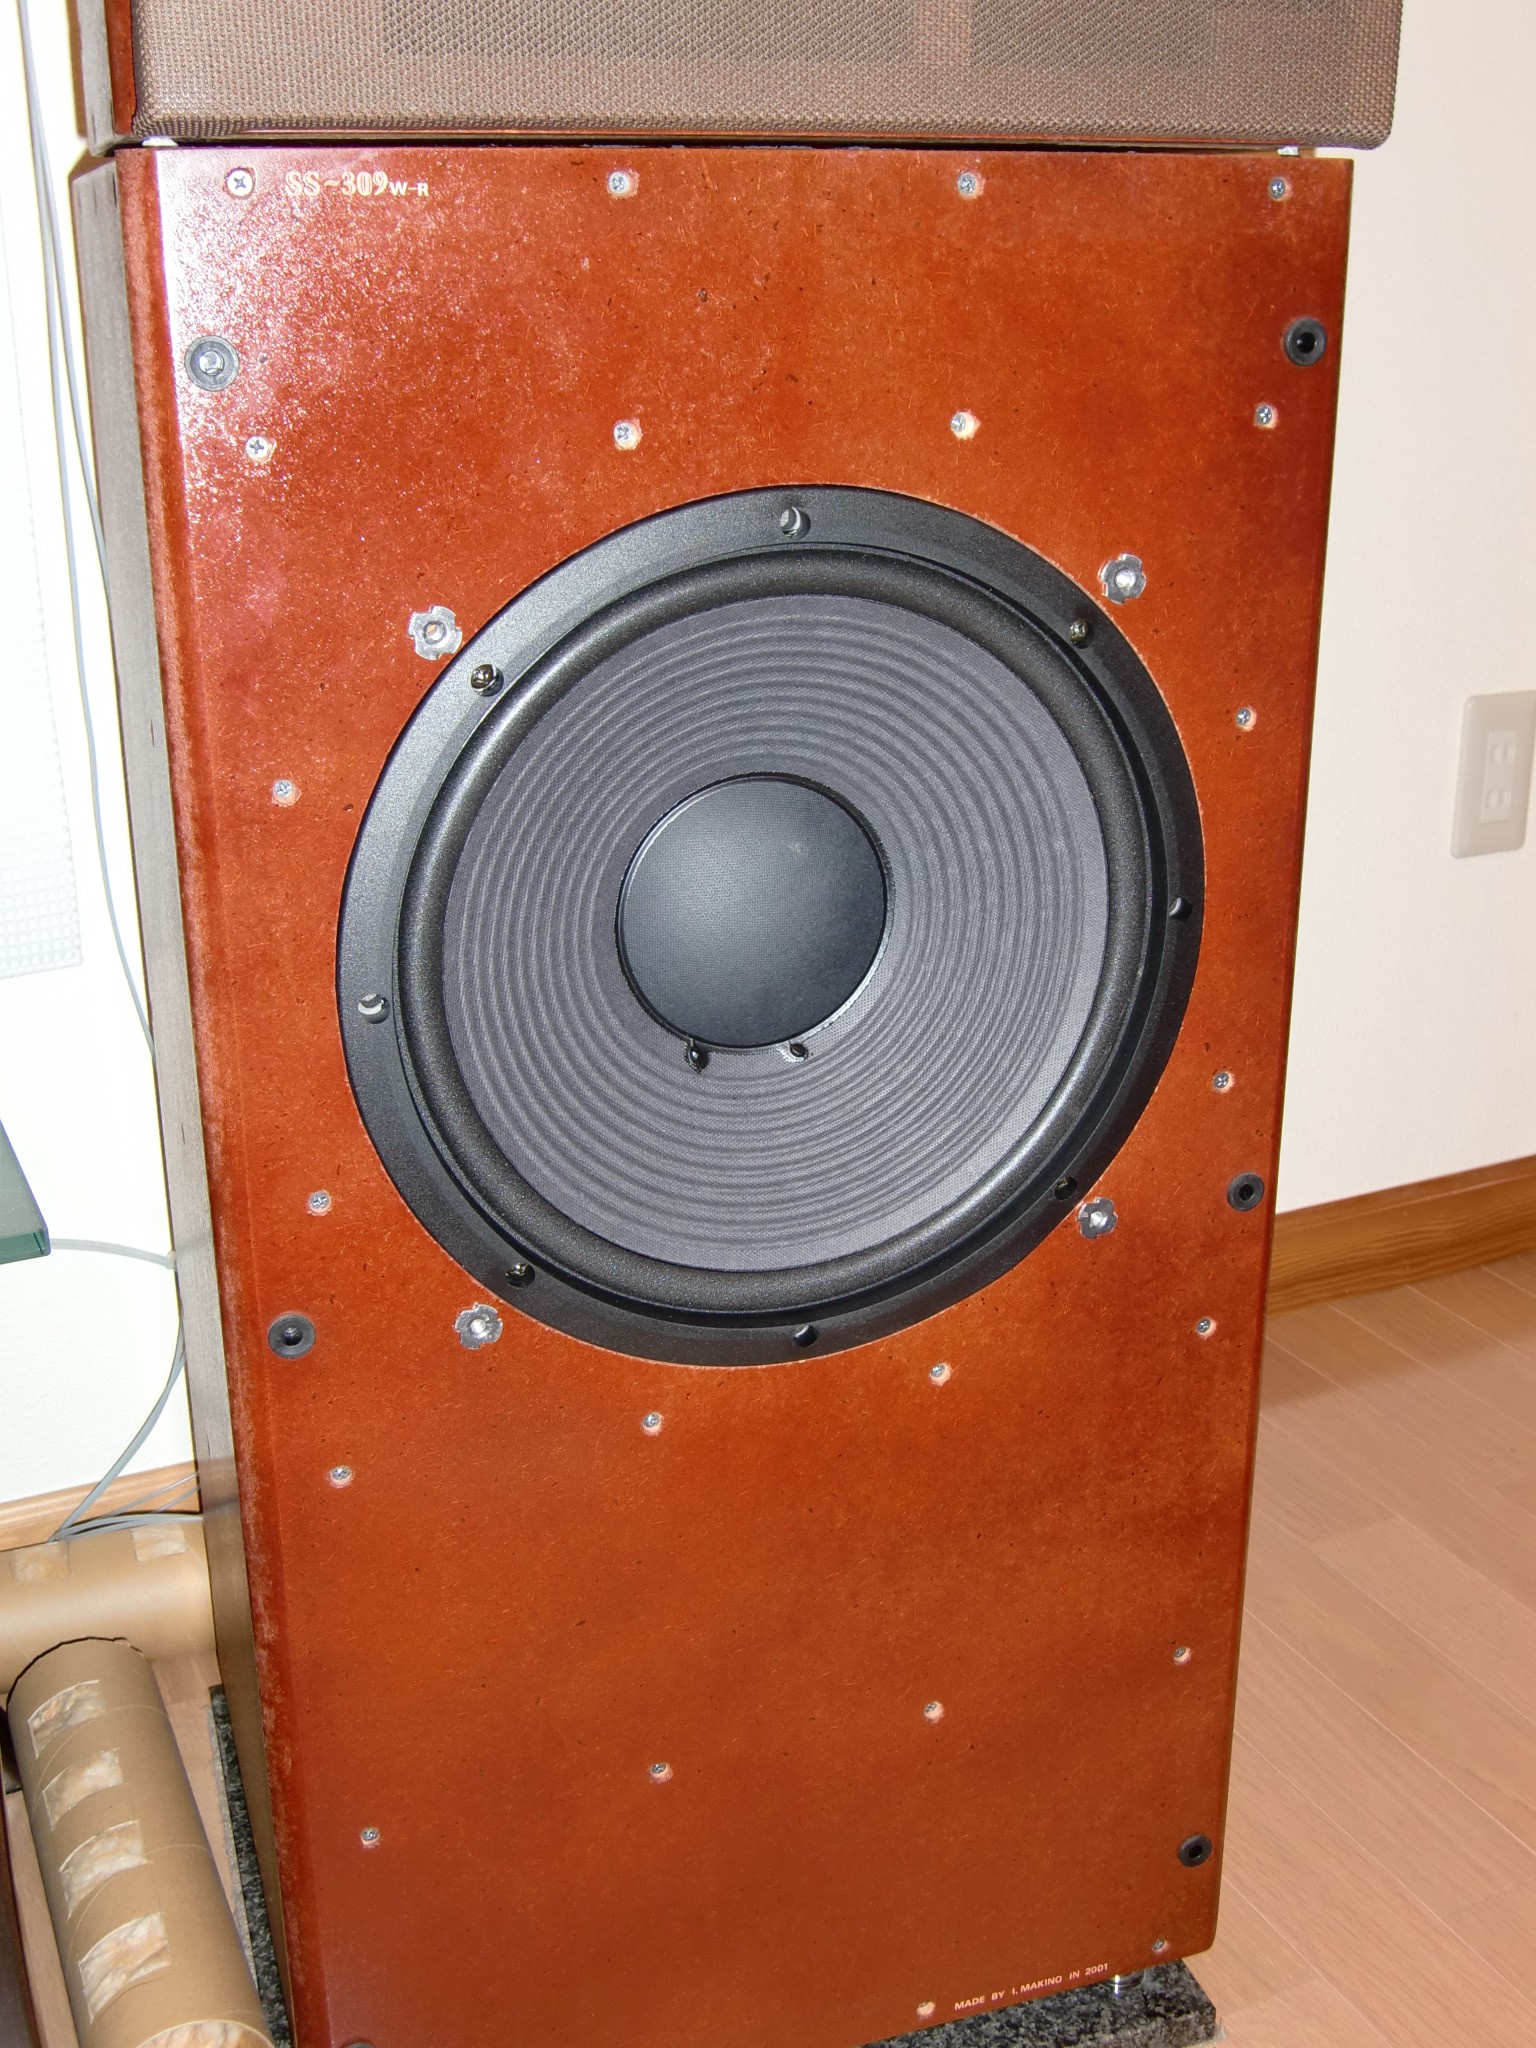 Completed woofer module (front view)